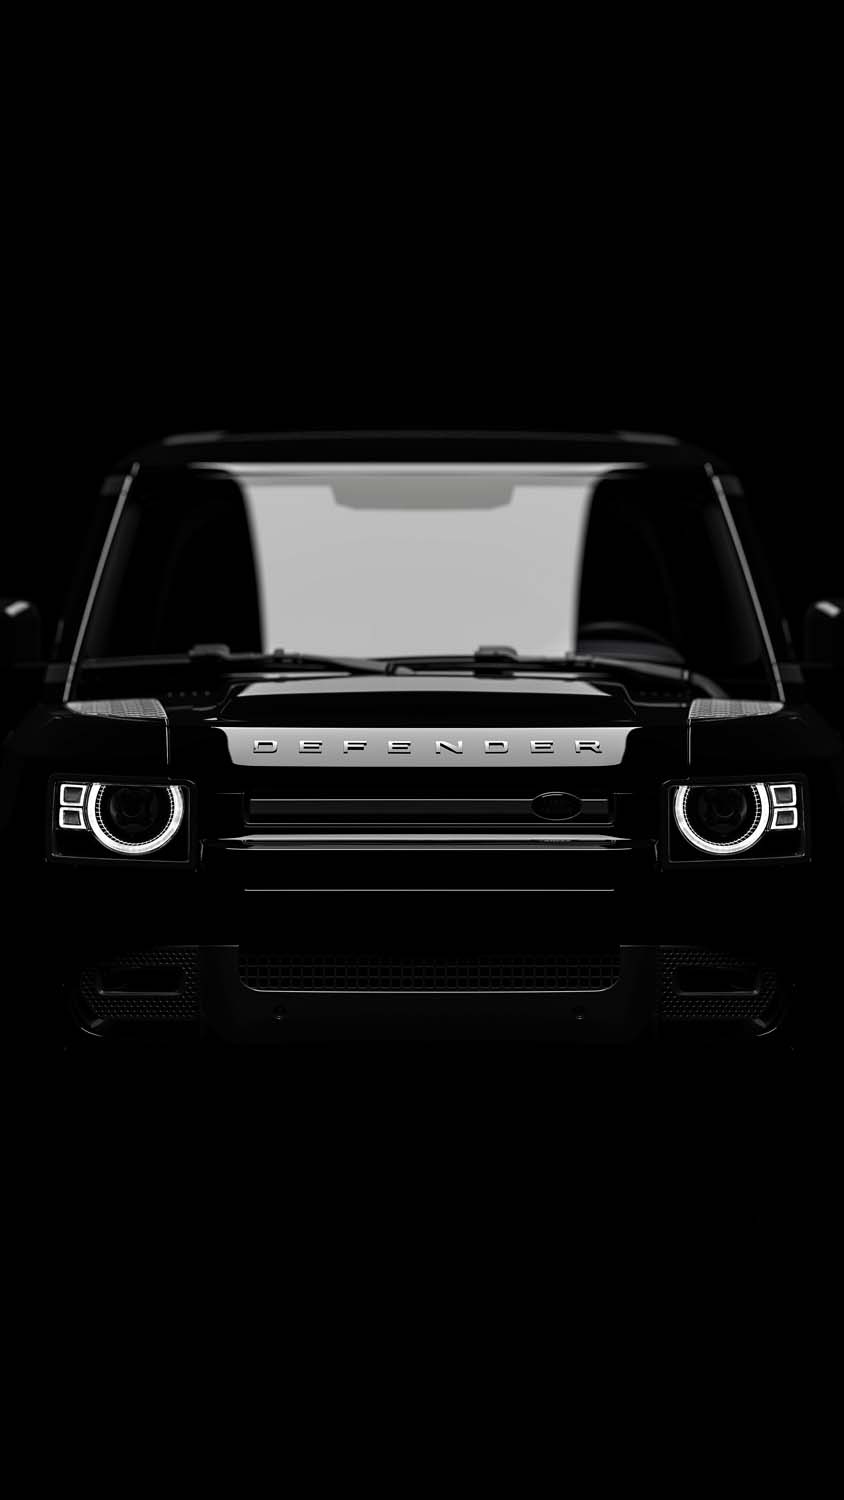 Land Rover Defender IPhone Wallpaper HD - IPhone Wallpapers : iPhone  Wallpapers